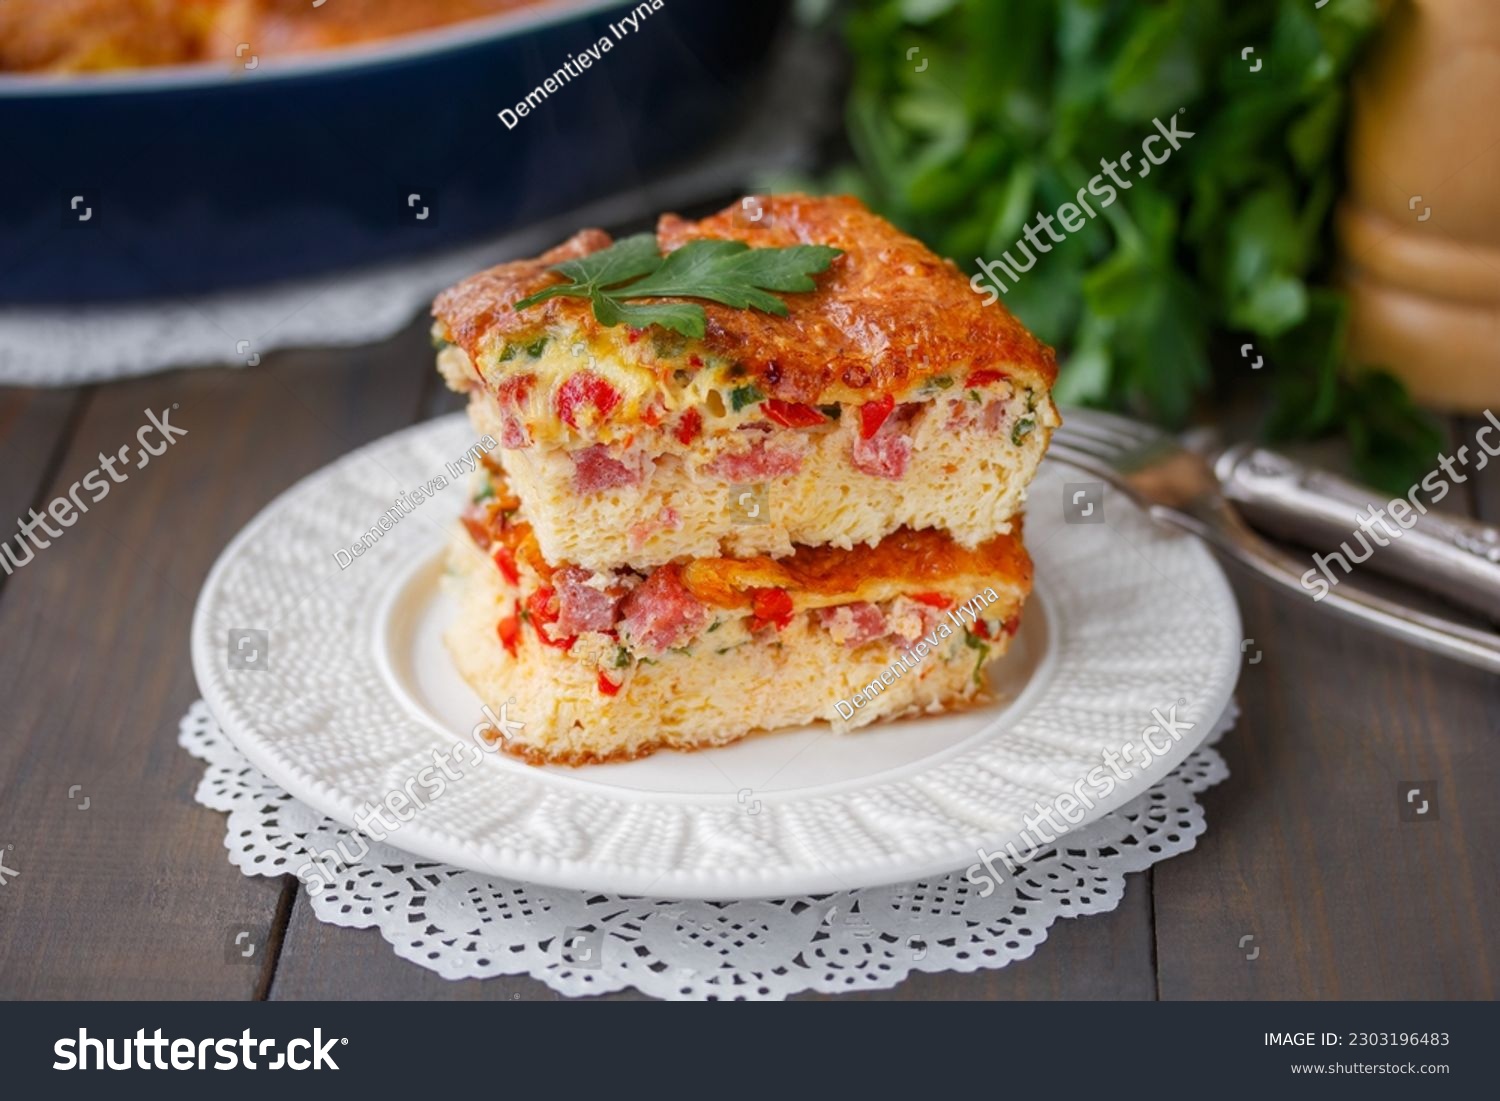 Fluffy Oven Baked omelette with cheese, tomato and ham sliced on a white ceramic plate. Vegetable Soufflé or Puffy omelet. Selective focus, horizontal, closeup, wooden table. #2303196483